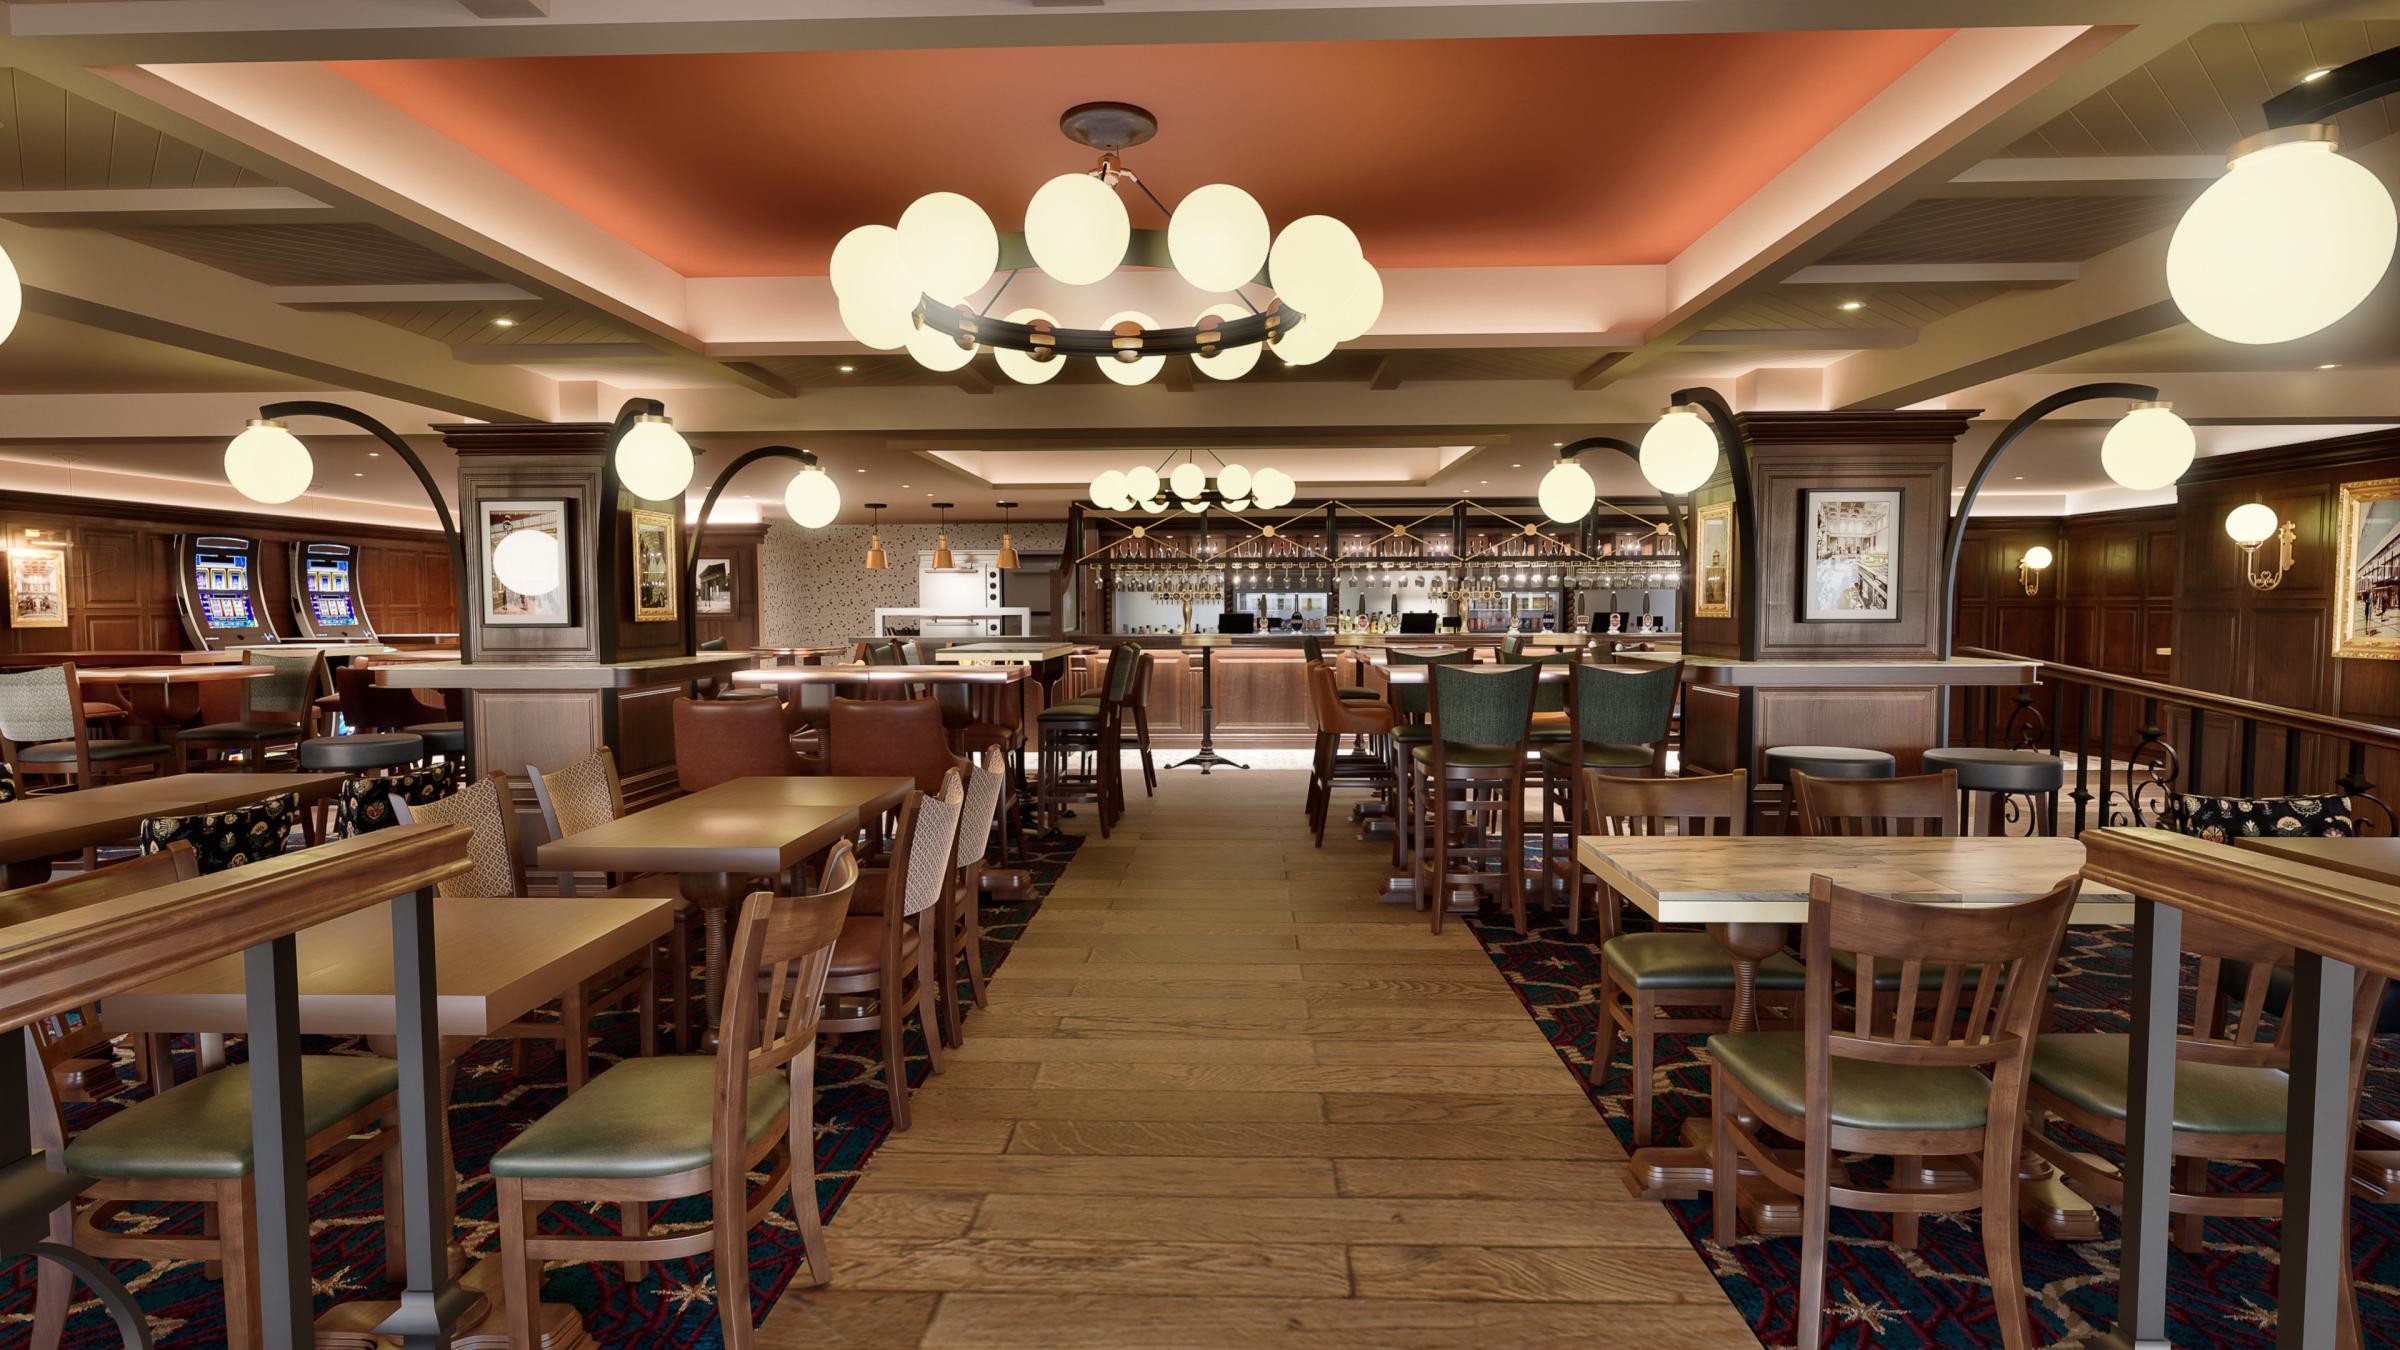  An artists impression of The Captain Flinders in Eversholt Street, Euston. Photo: DV Architects